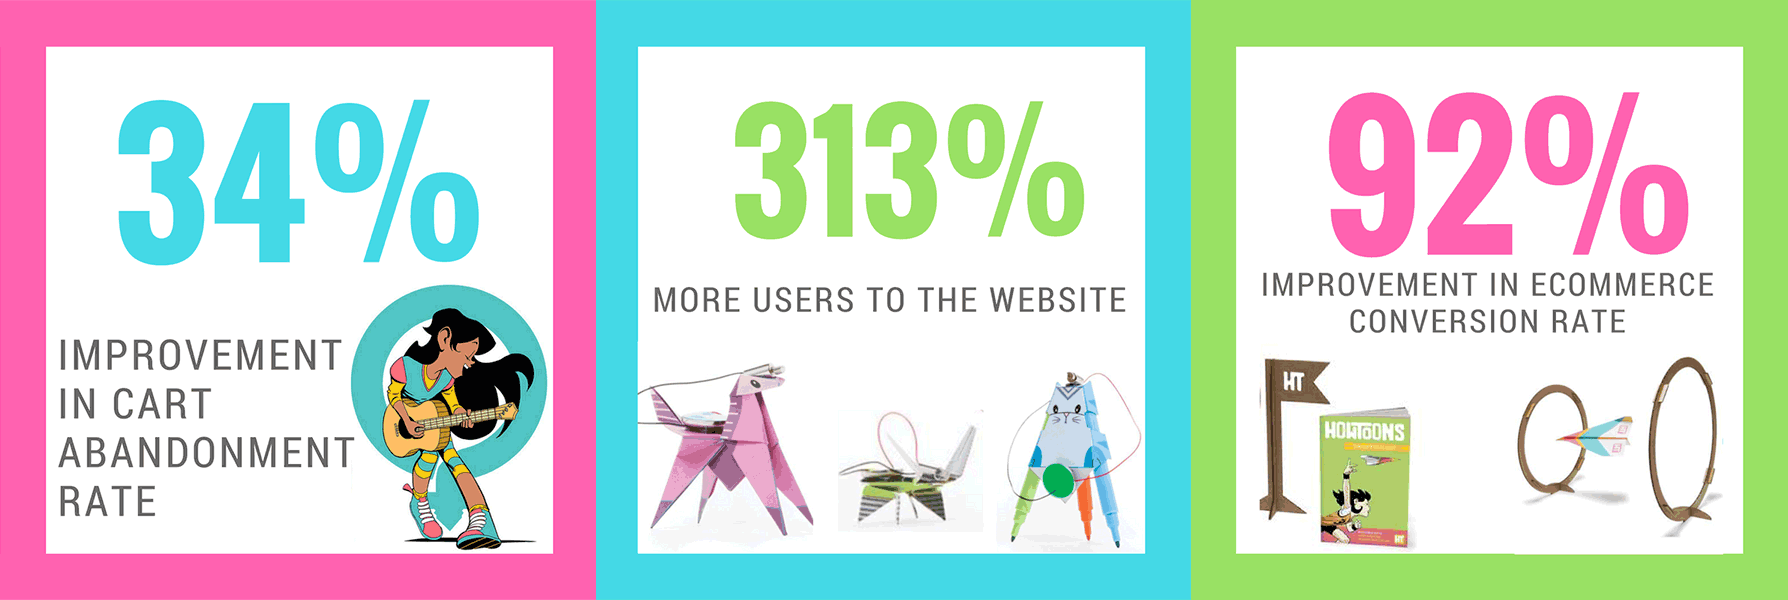 Case Study: HowToons - 34% improvement in cart abandonment rate / 313% more users to the website / 92% improvement in ecommerce conversion rate